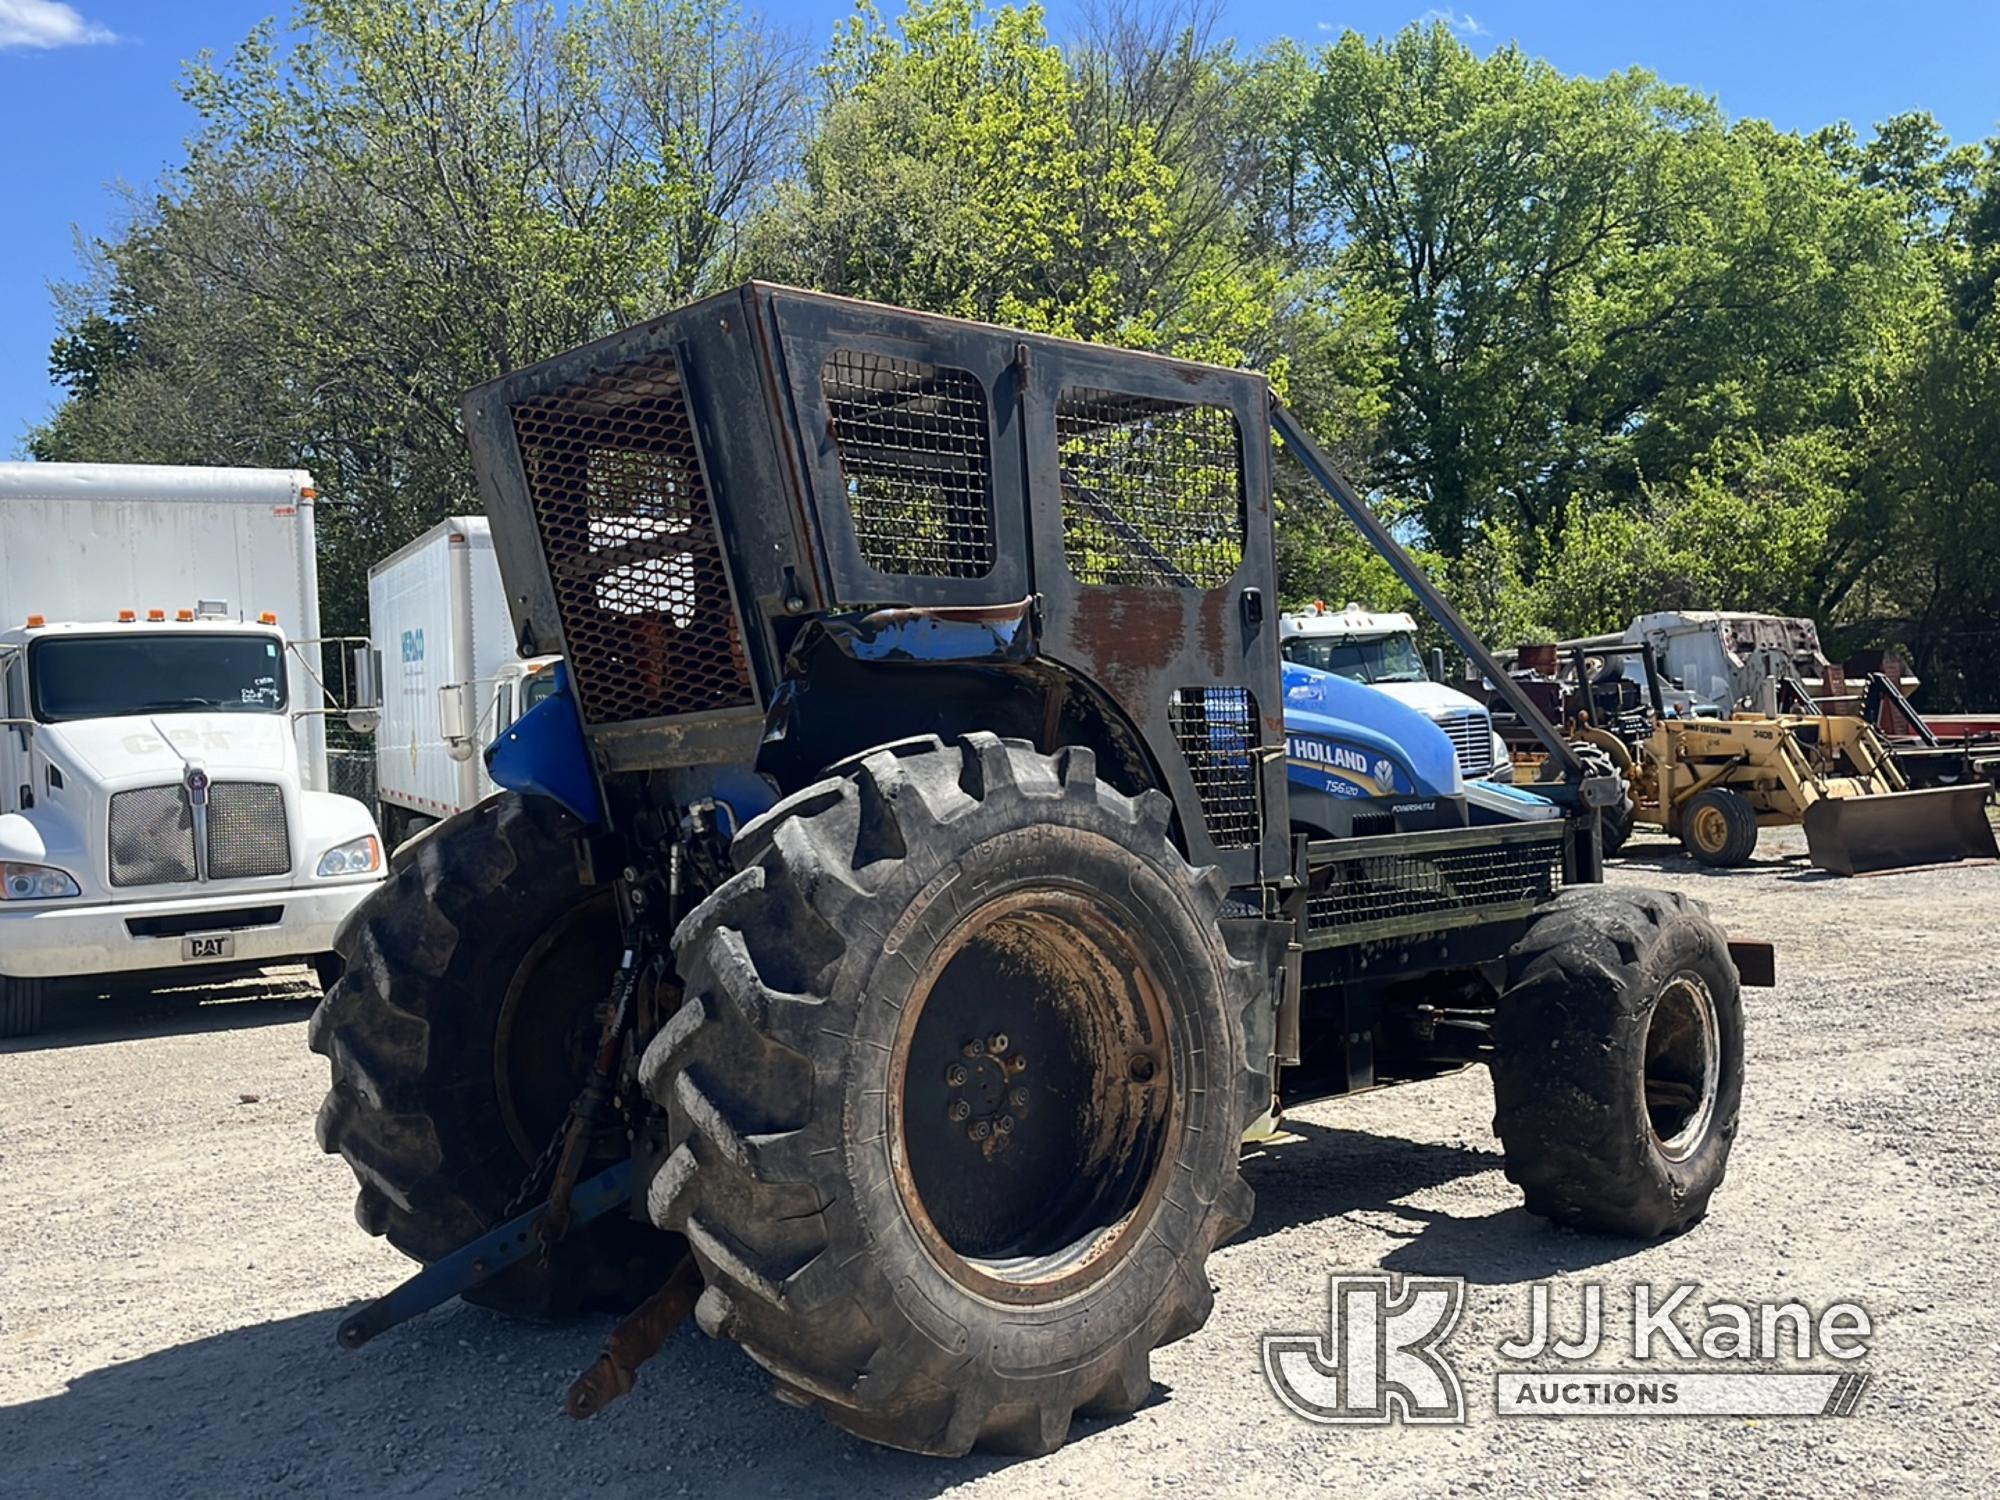 (Charlotte, NC) 2013 New Holland TS6.120 MFWD Utility Tractor Not Running, Condition Unknown)(Seller